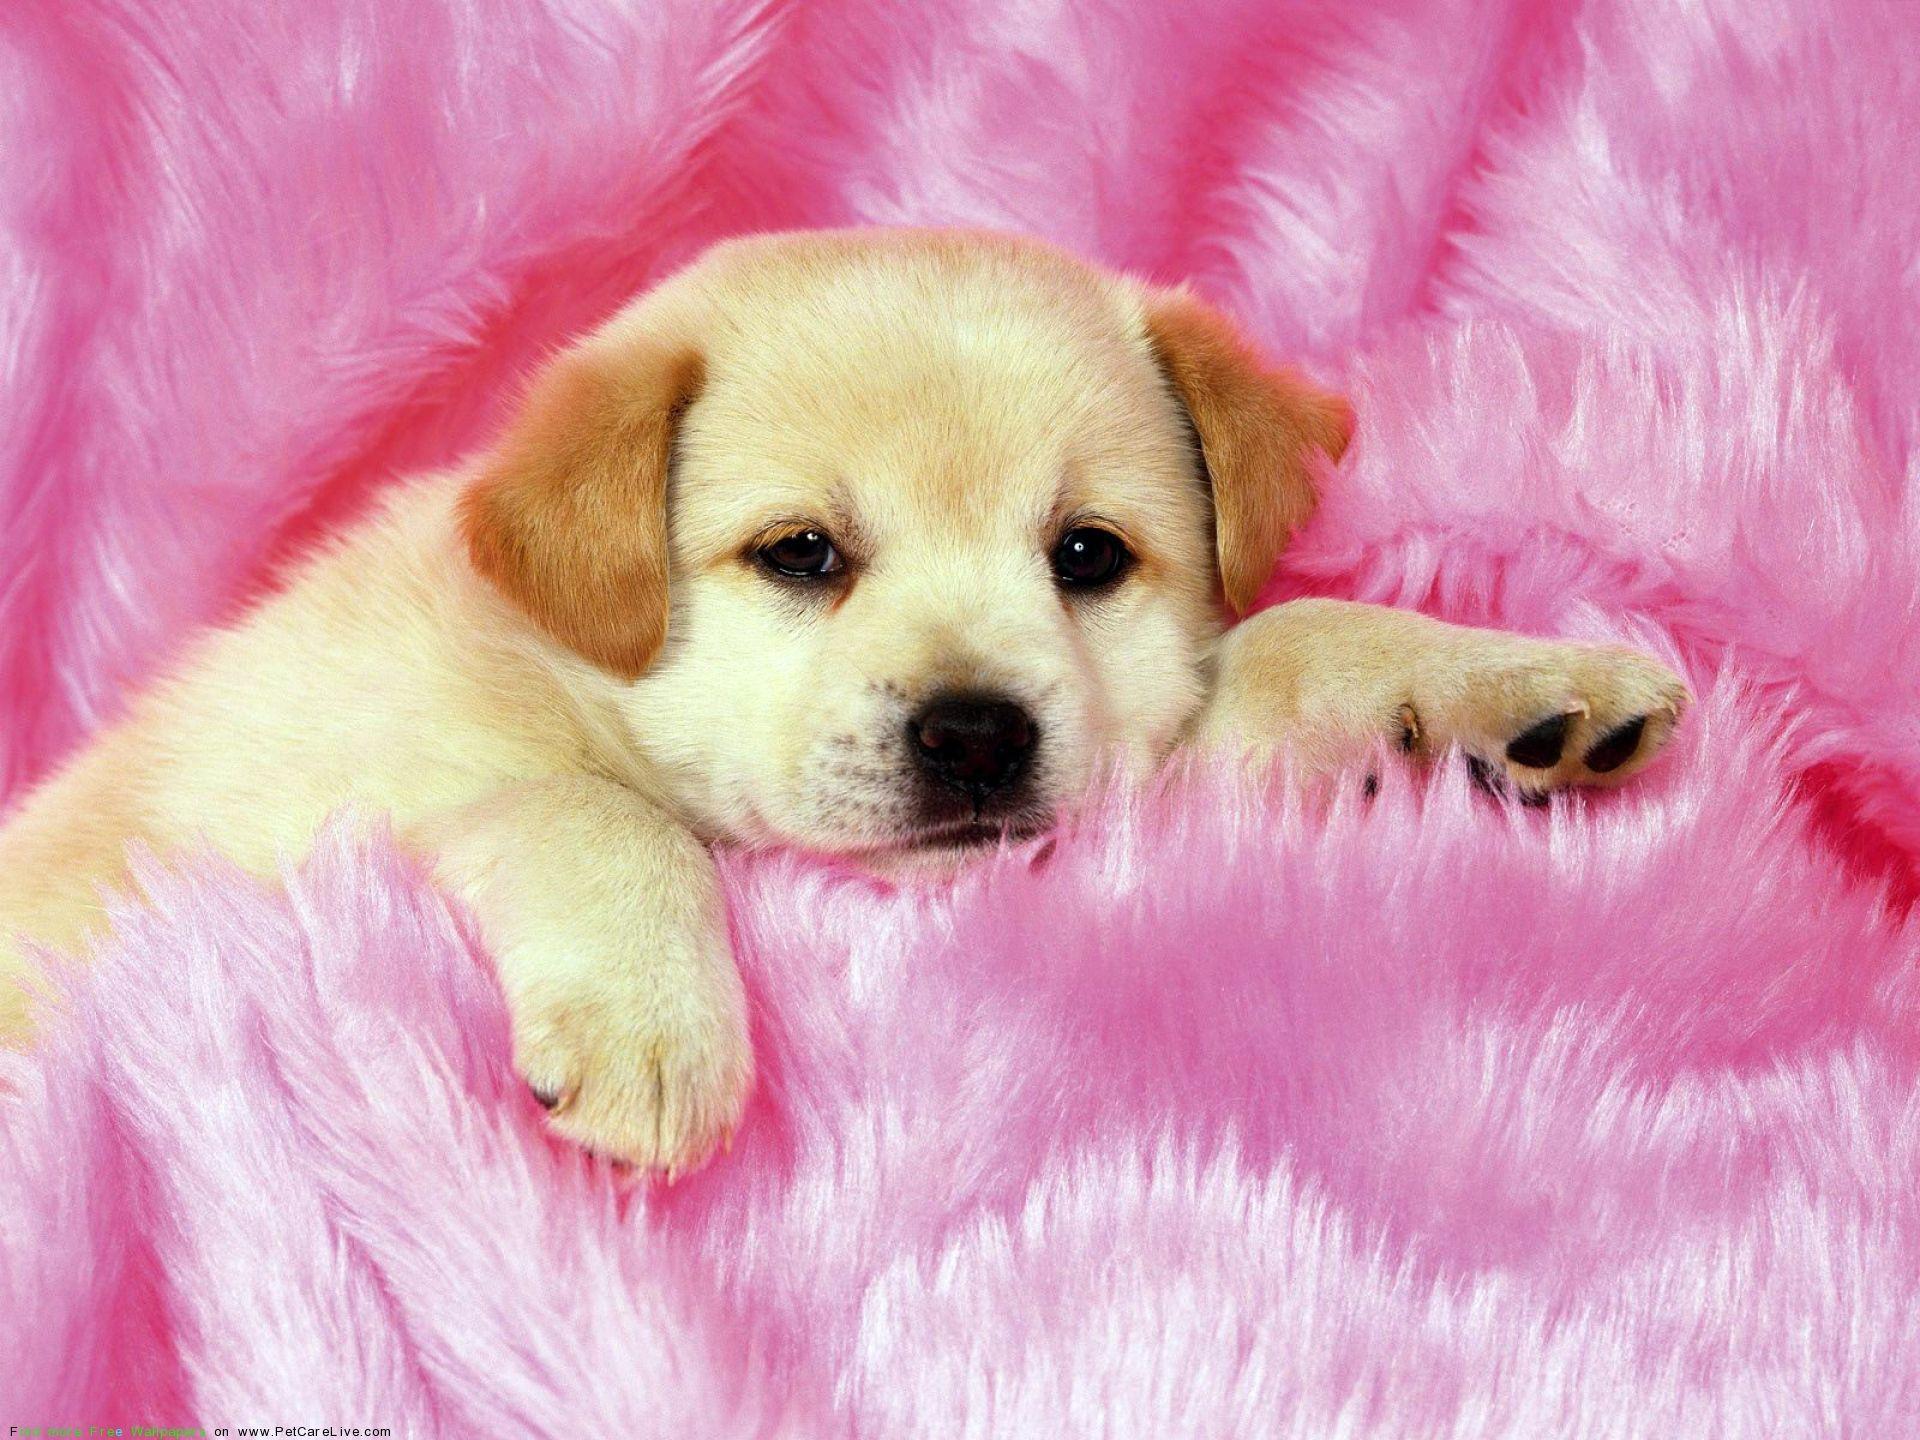 Cute Little Puppys Puppy Picture Widescreen With Small High Quality